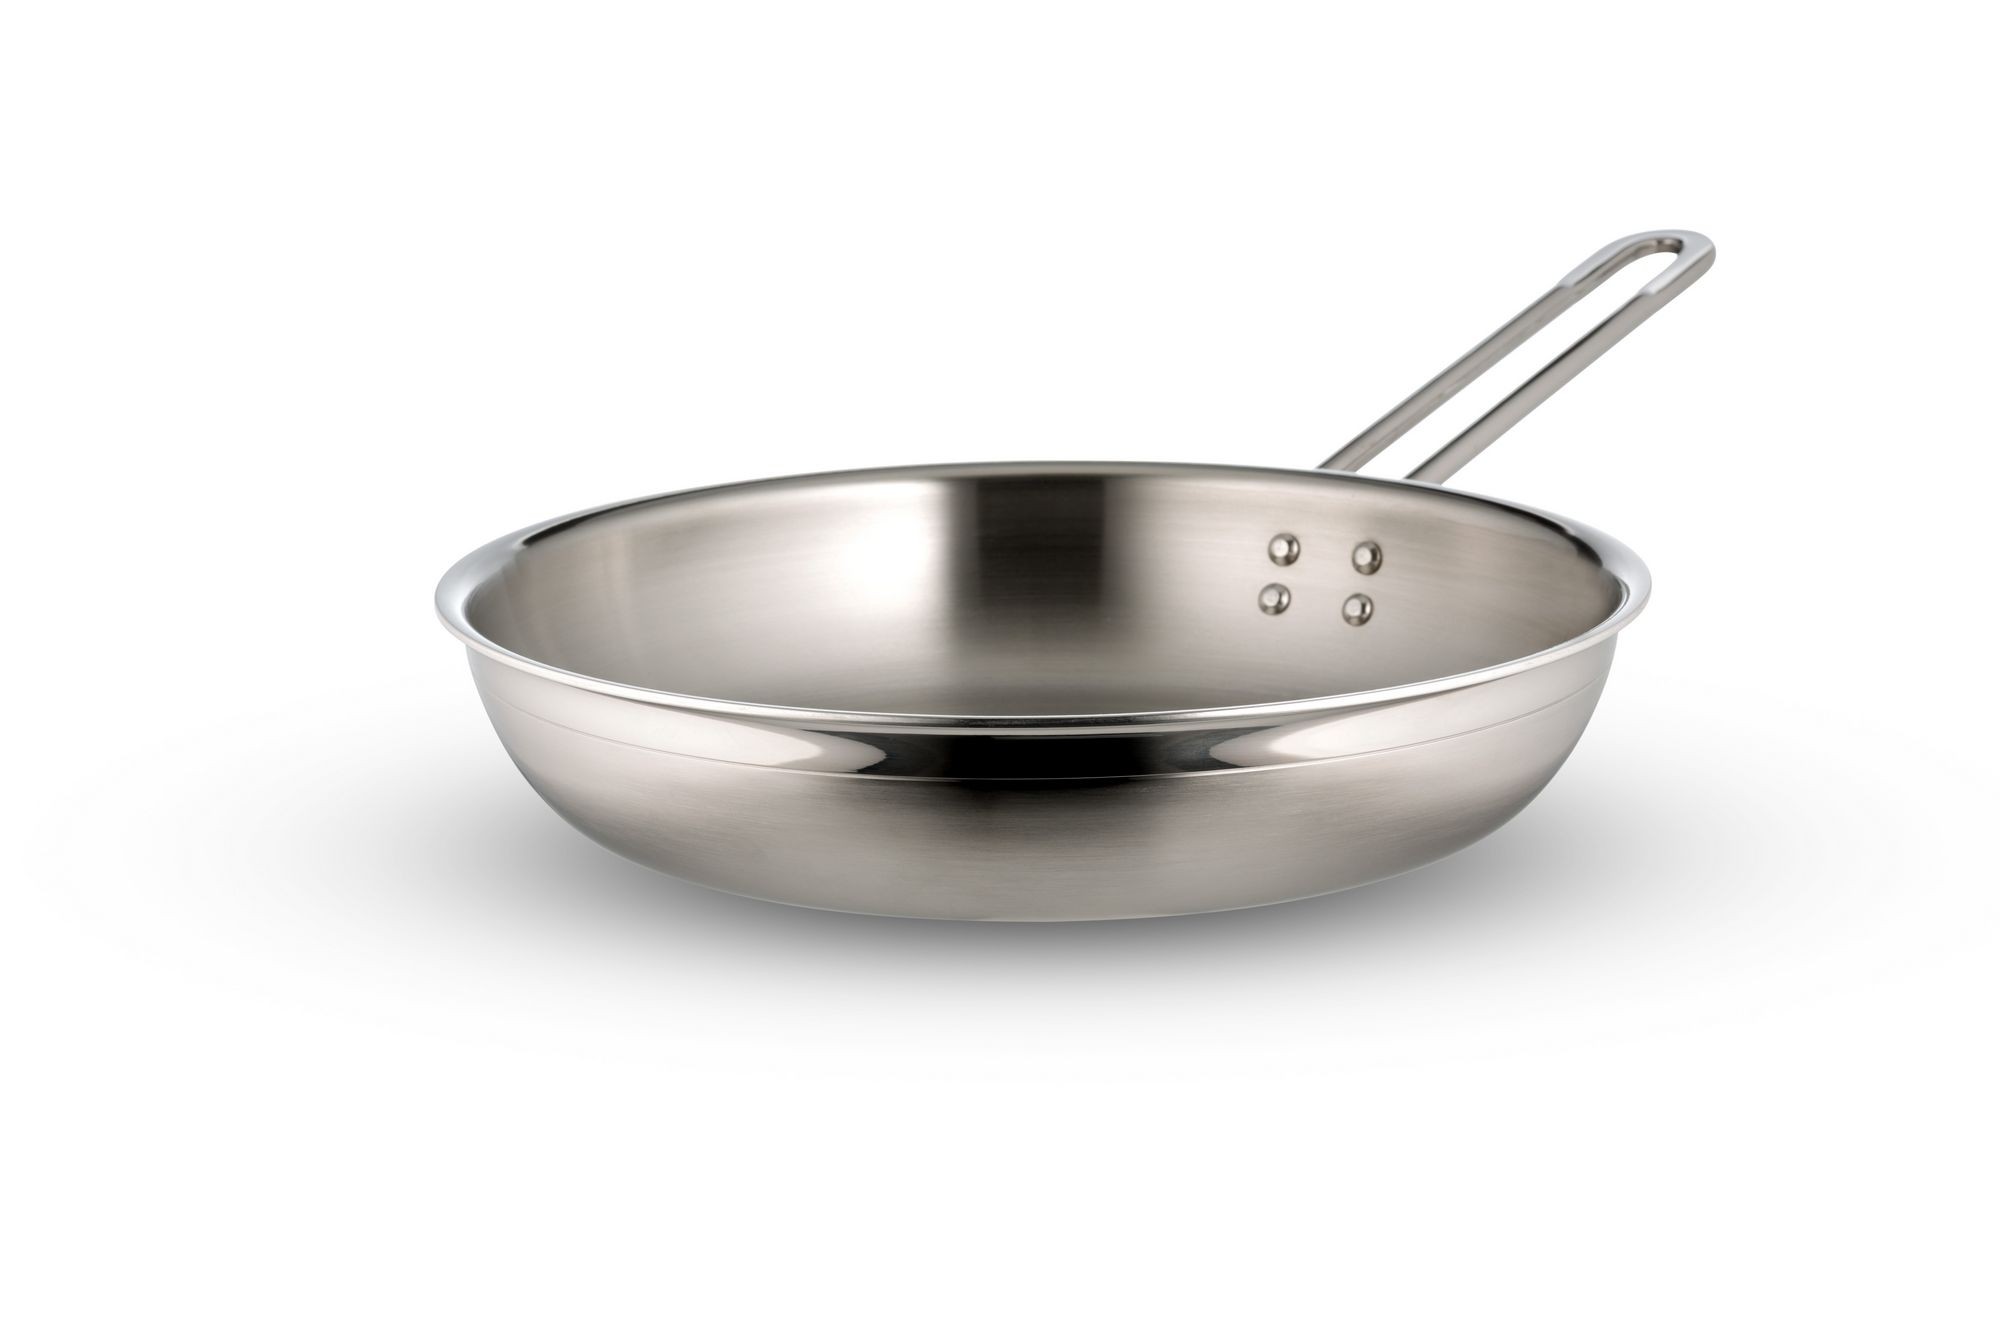 Bon Chef 60309-2ToneSS Country French Two Tone Stainless Steel Saute Pan with Long Handle, 3 Qt. 4 oz.